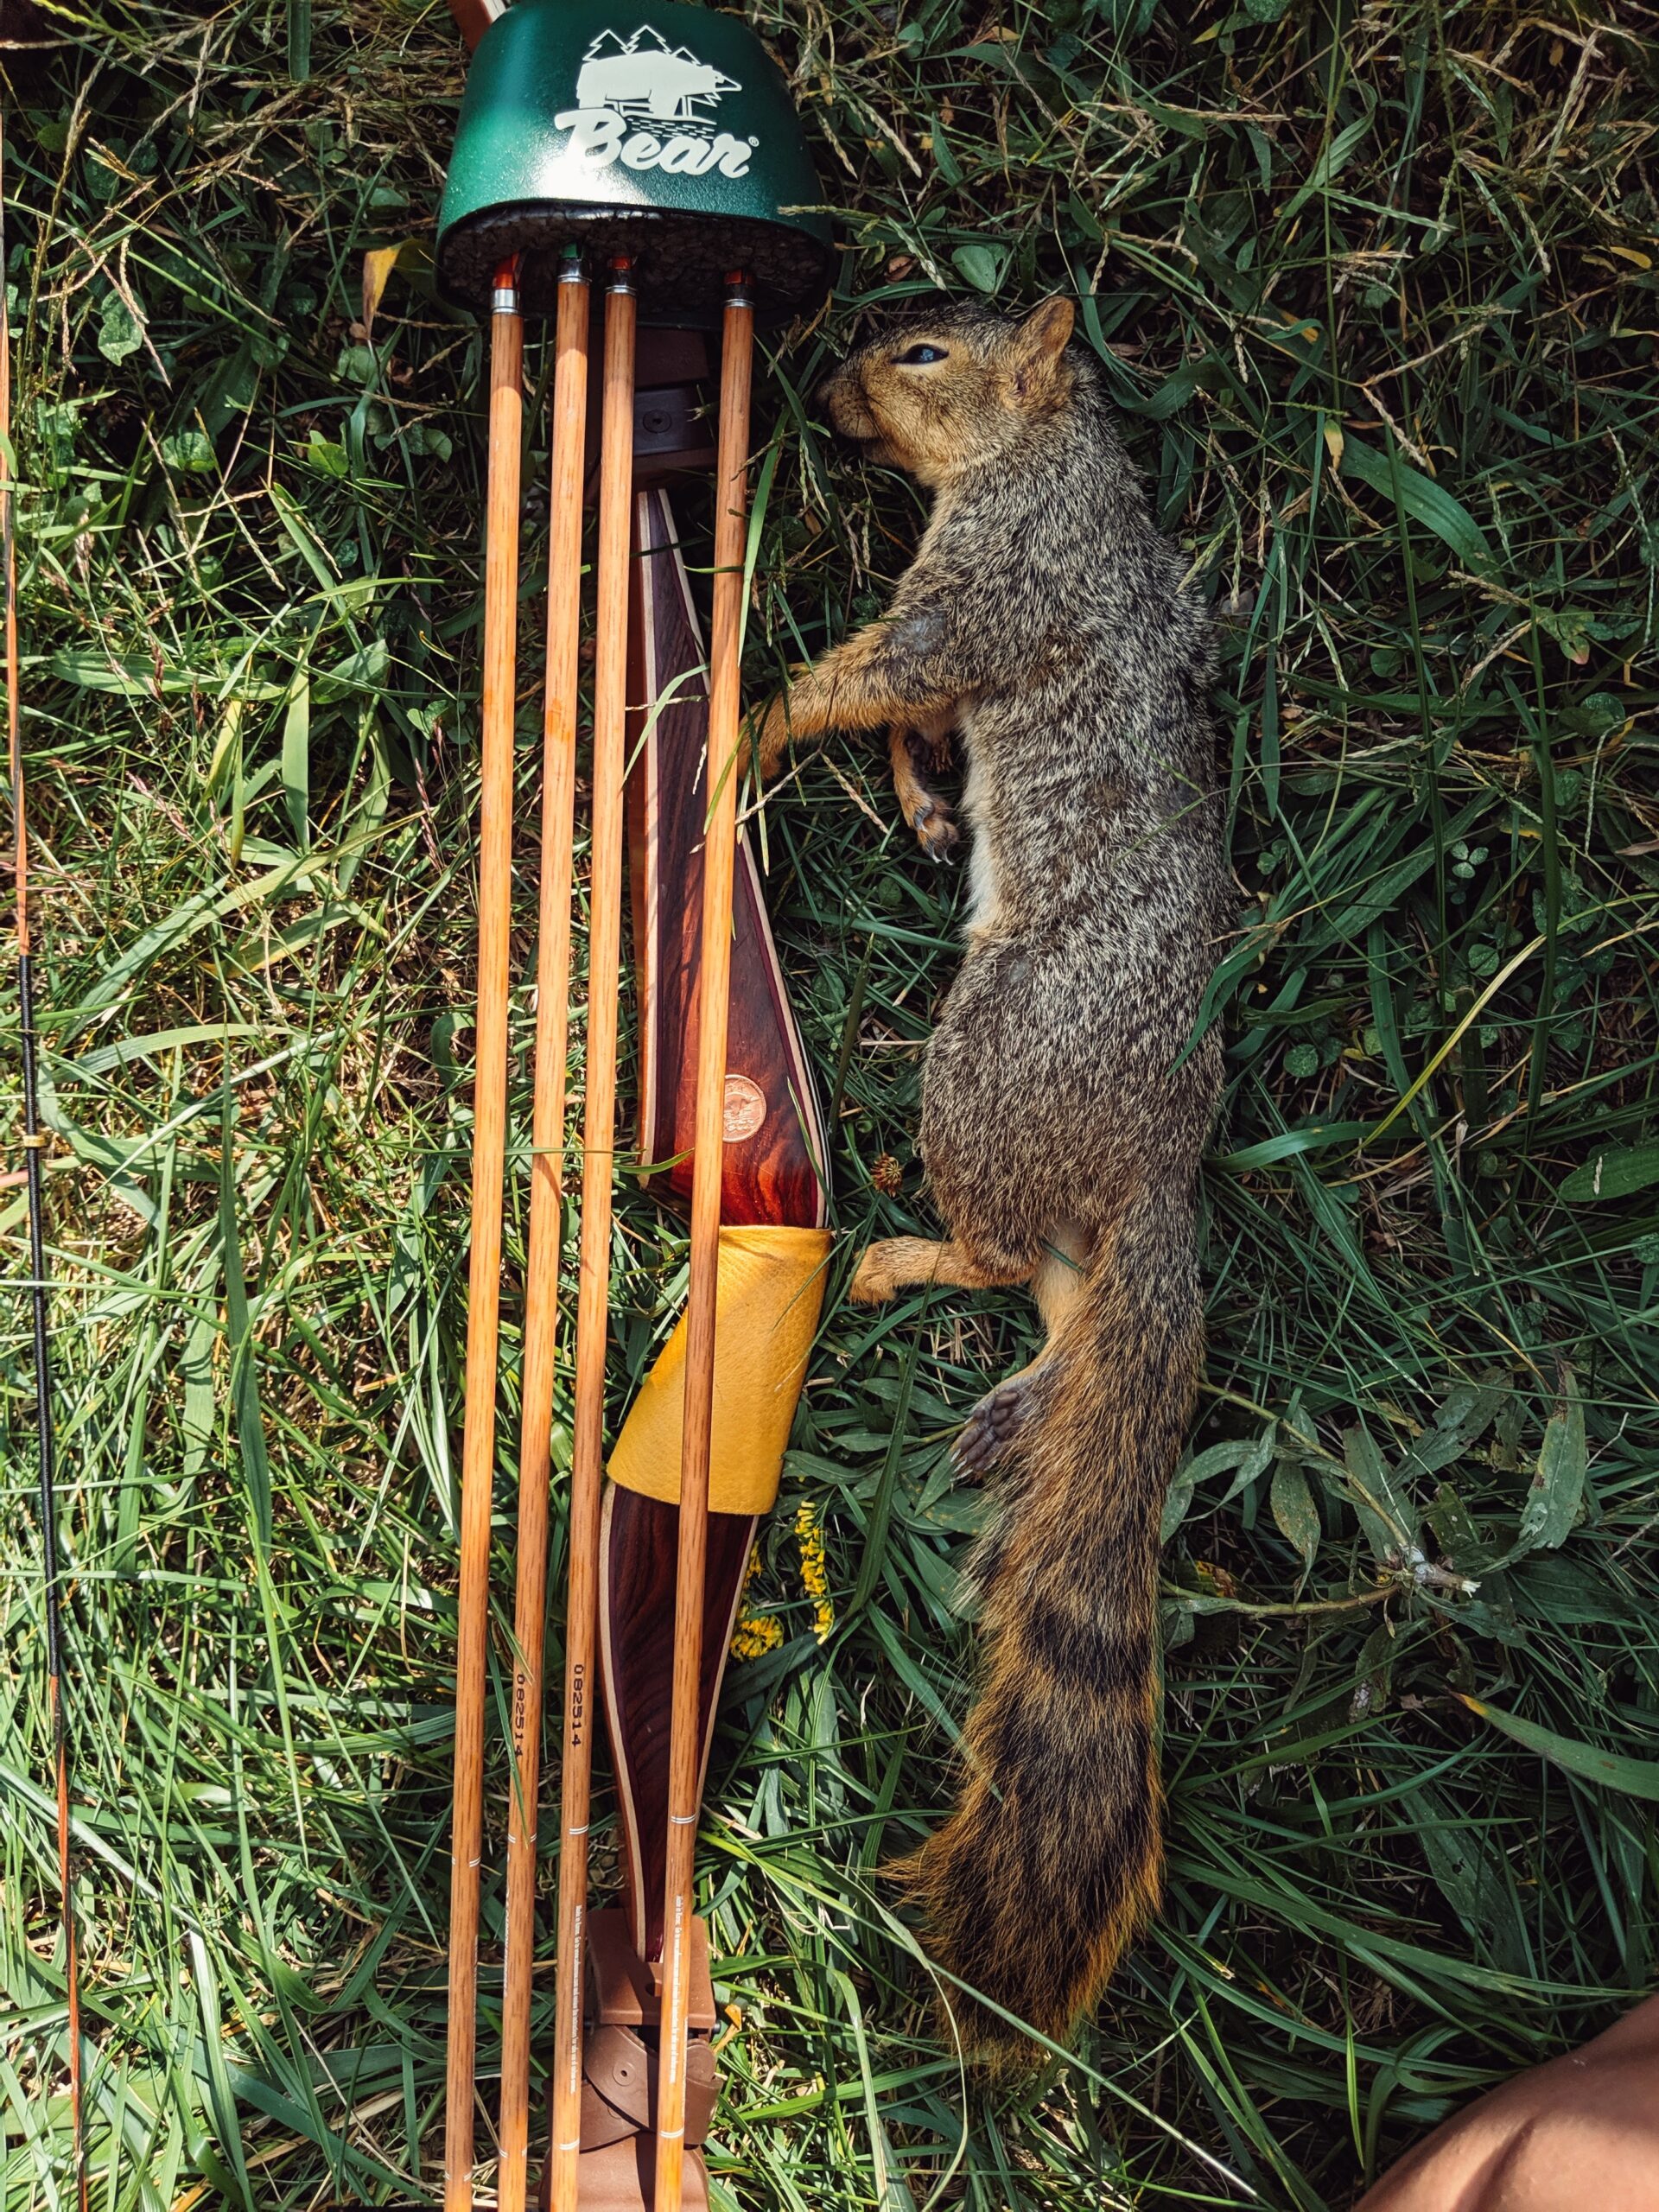 A dead squirrel beside a traditional bow and quiver.